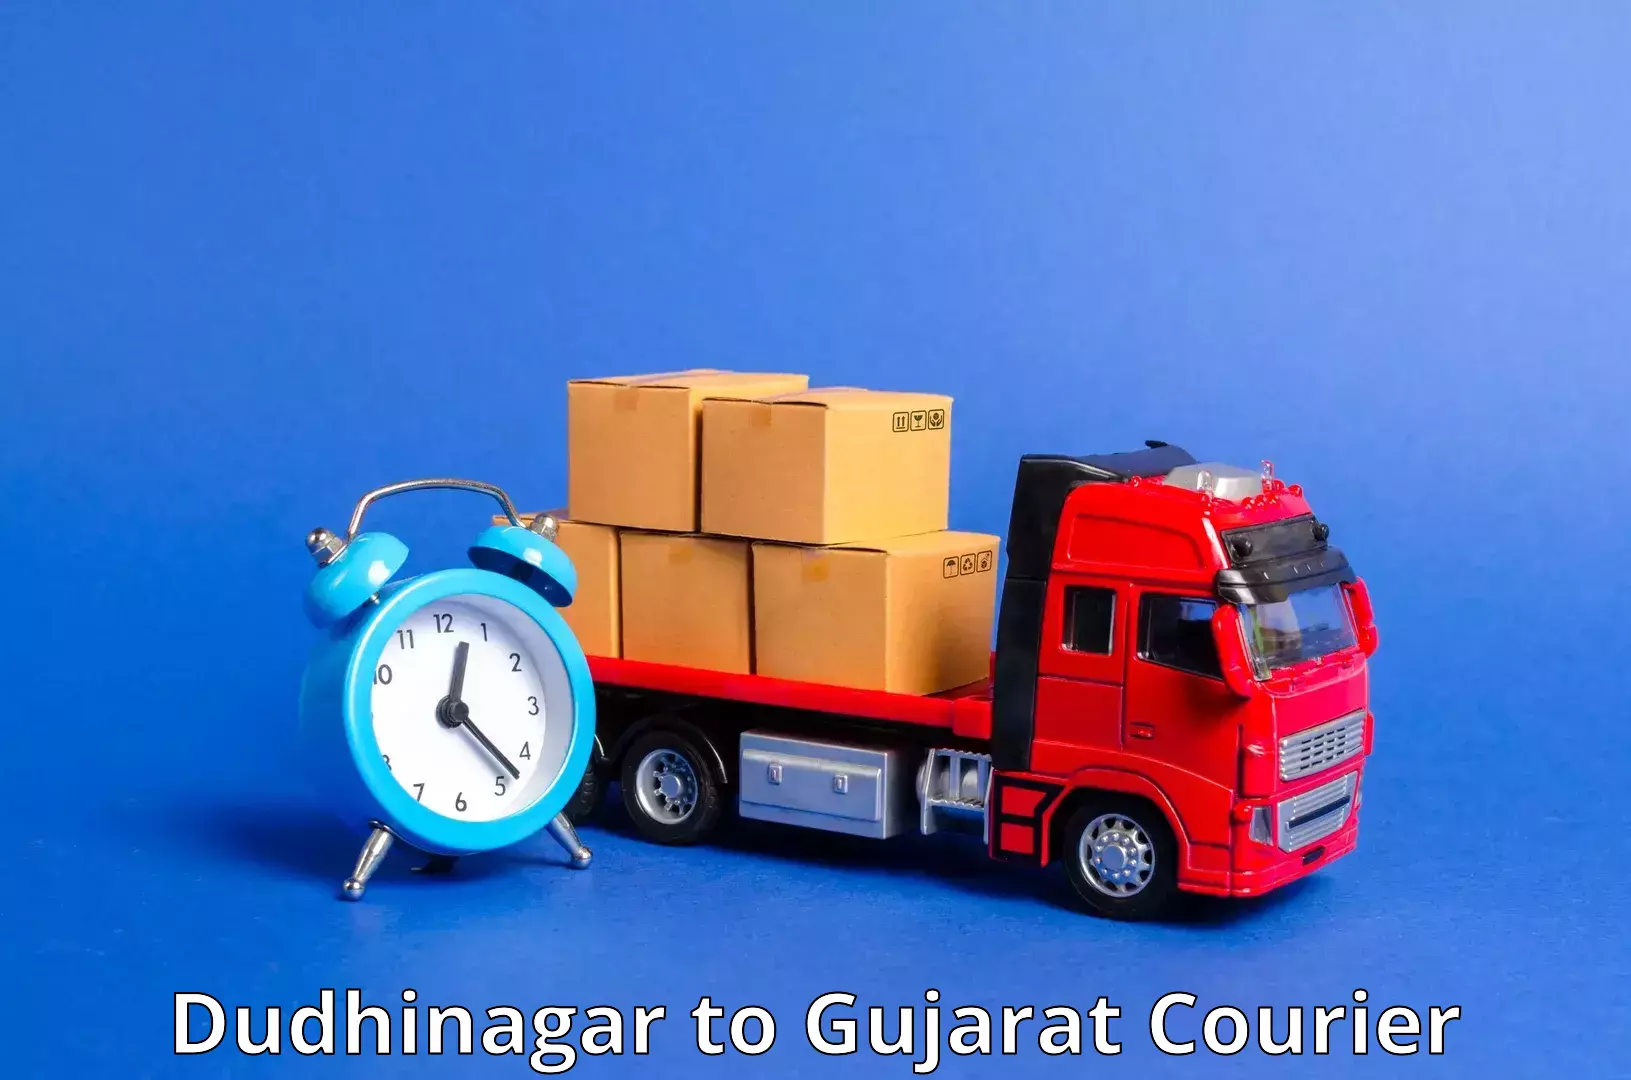 Reliable parcel services Dudhinagar to Kachchh